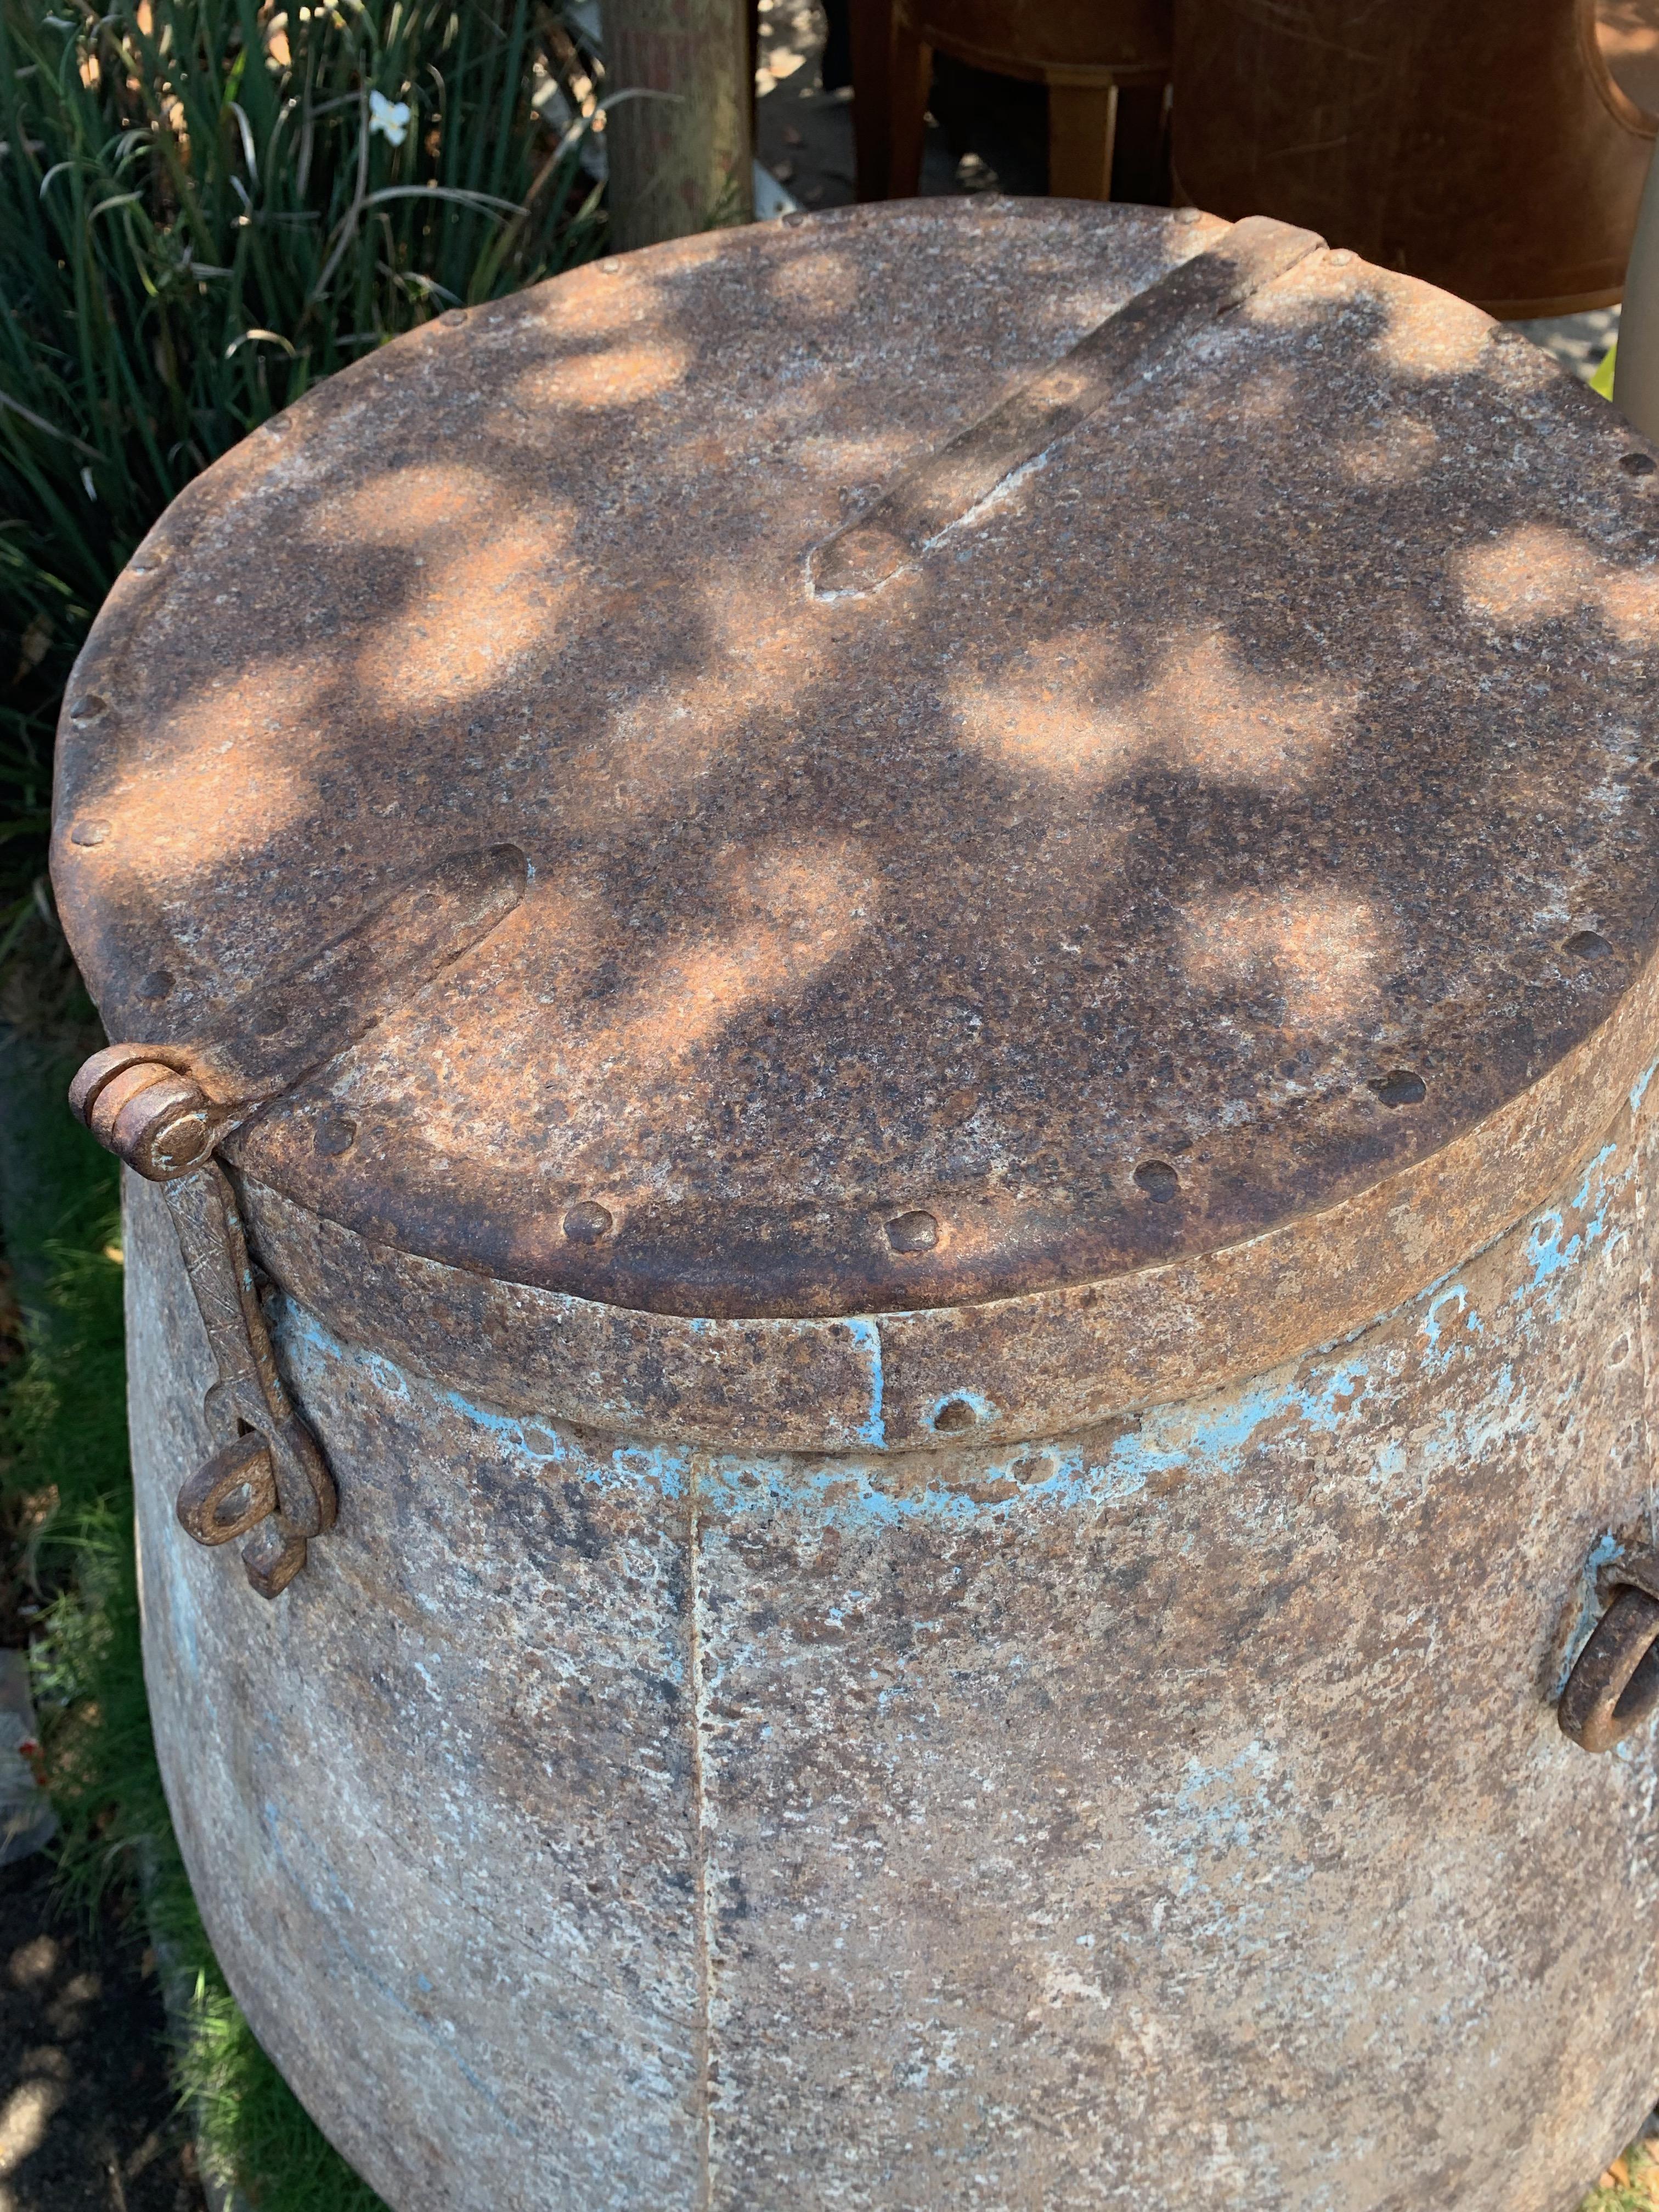 Beautifully patinated vintage grain barrel, a wonderful compliment to many landscapes or grand interiors. The top is removable, plants or items can be placed inside.